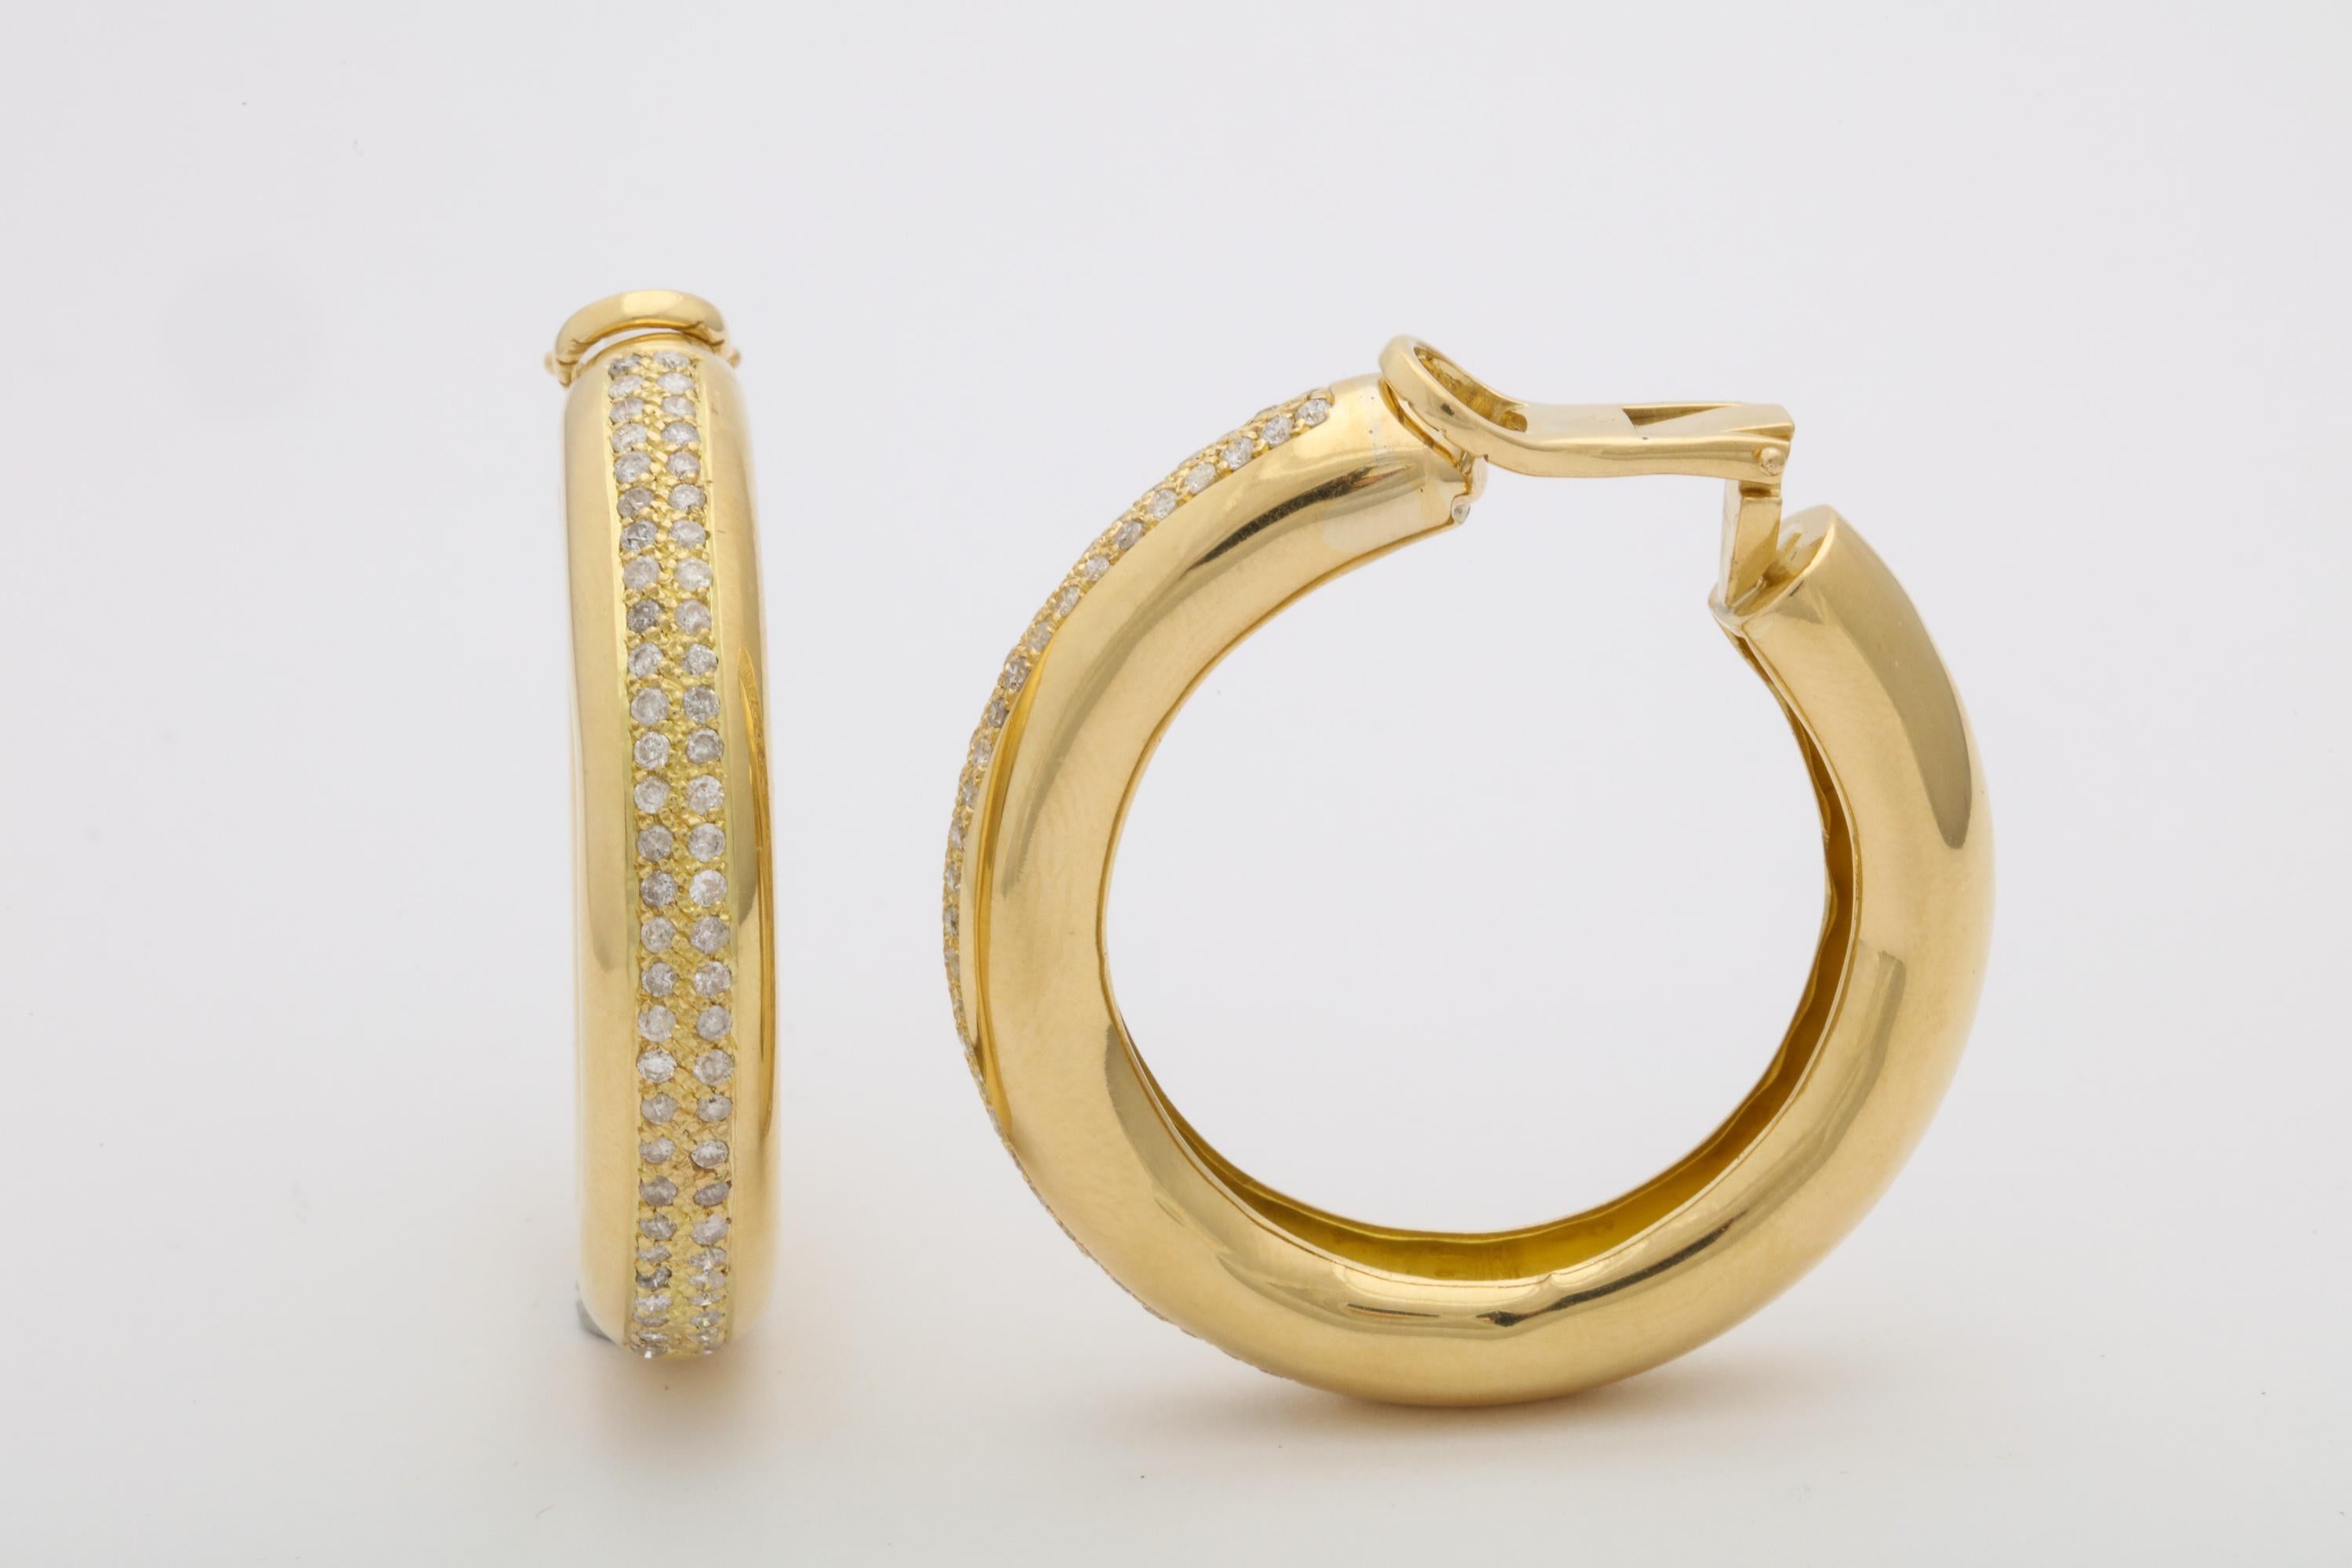 One Pair Of Large Ladies 18kt Gold Jumbo Hoop Earrings Designed With A Double Row Of Diamonds Totaling Approximately 3 Carats. One Minor Dent To Side Of Earrings Barely Noticeable To Naked eye. High Quality Clip On Backs In Which Posts May Be Added